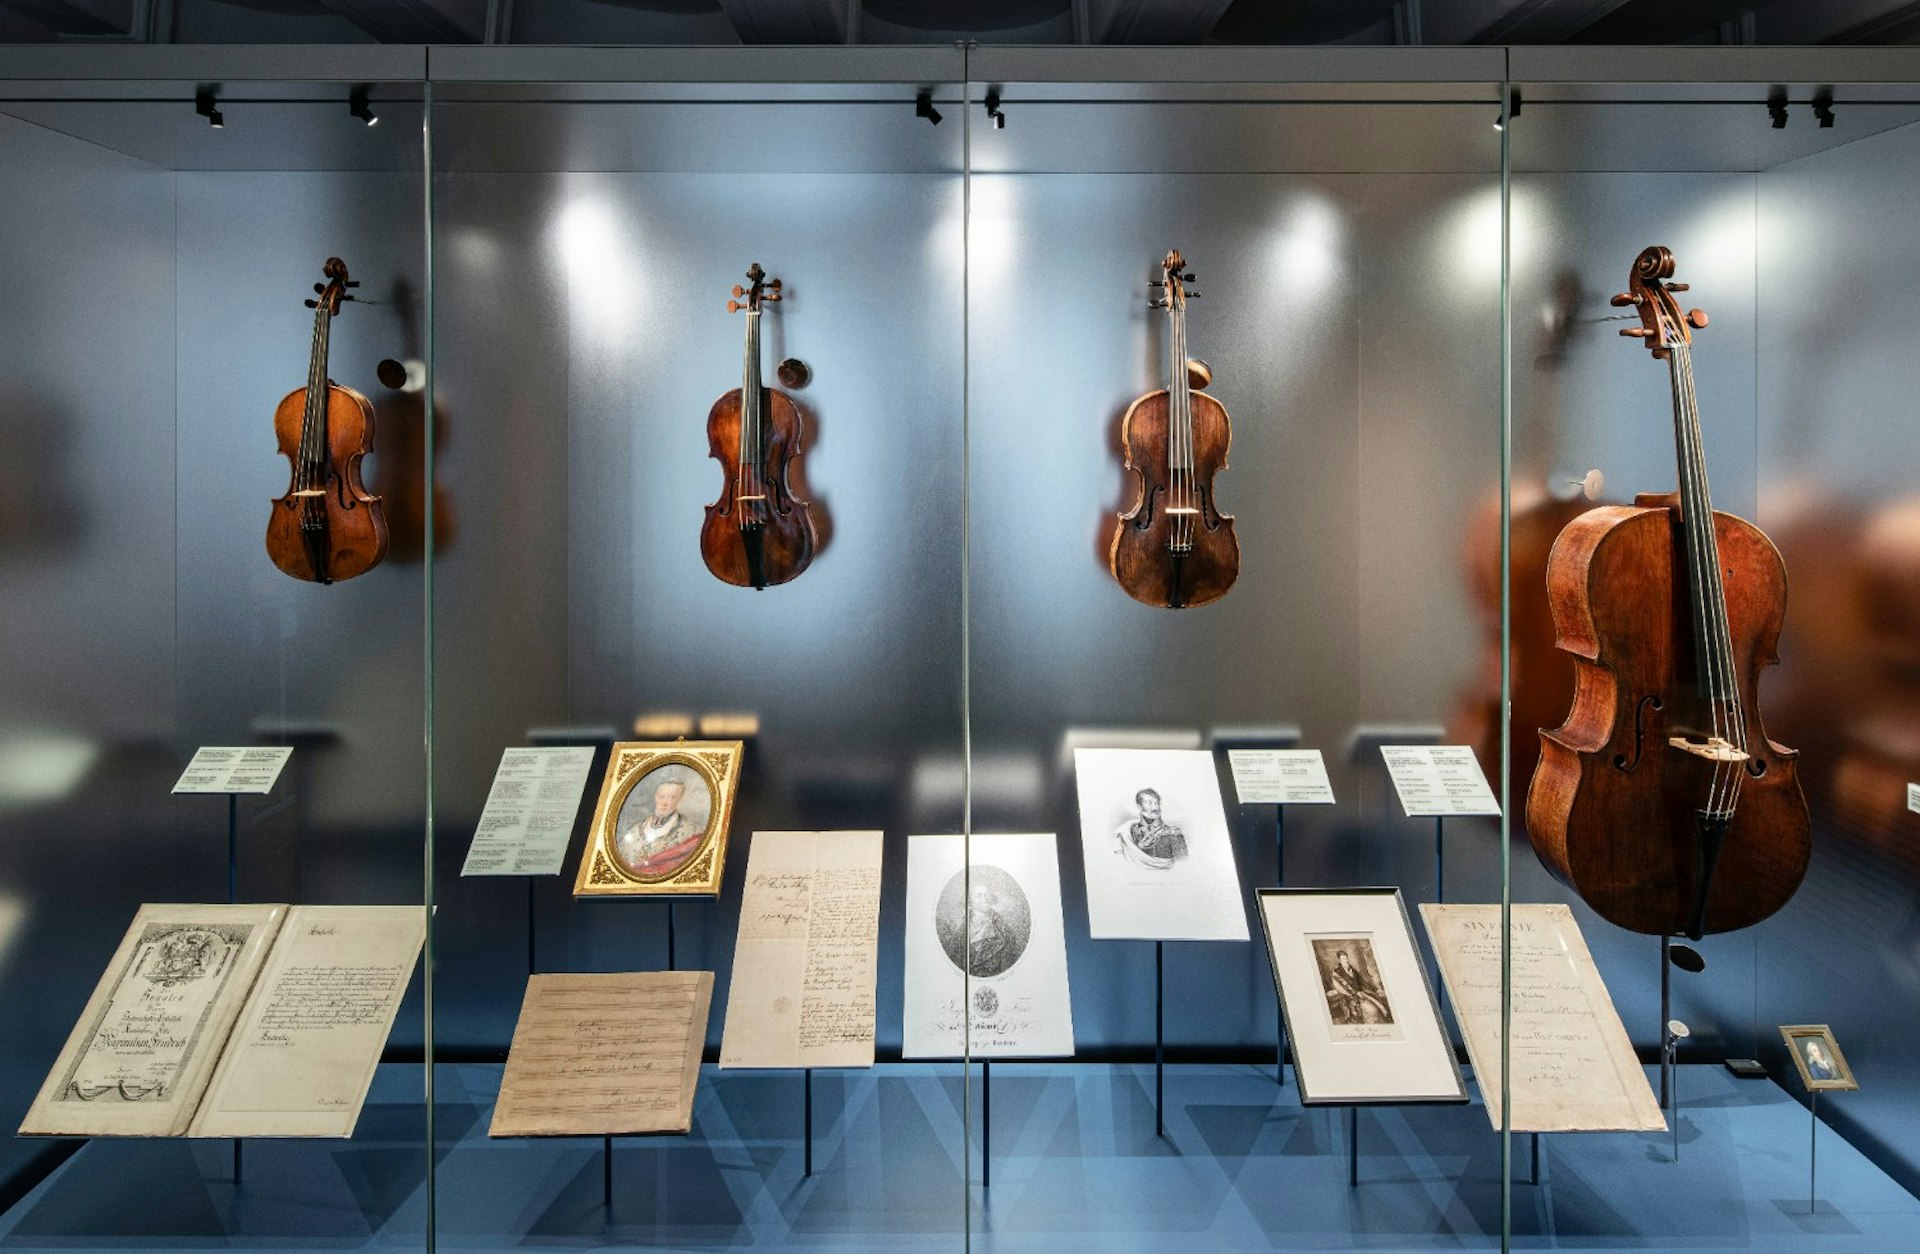 Exhibits on display at Beethoven Haus